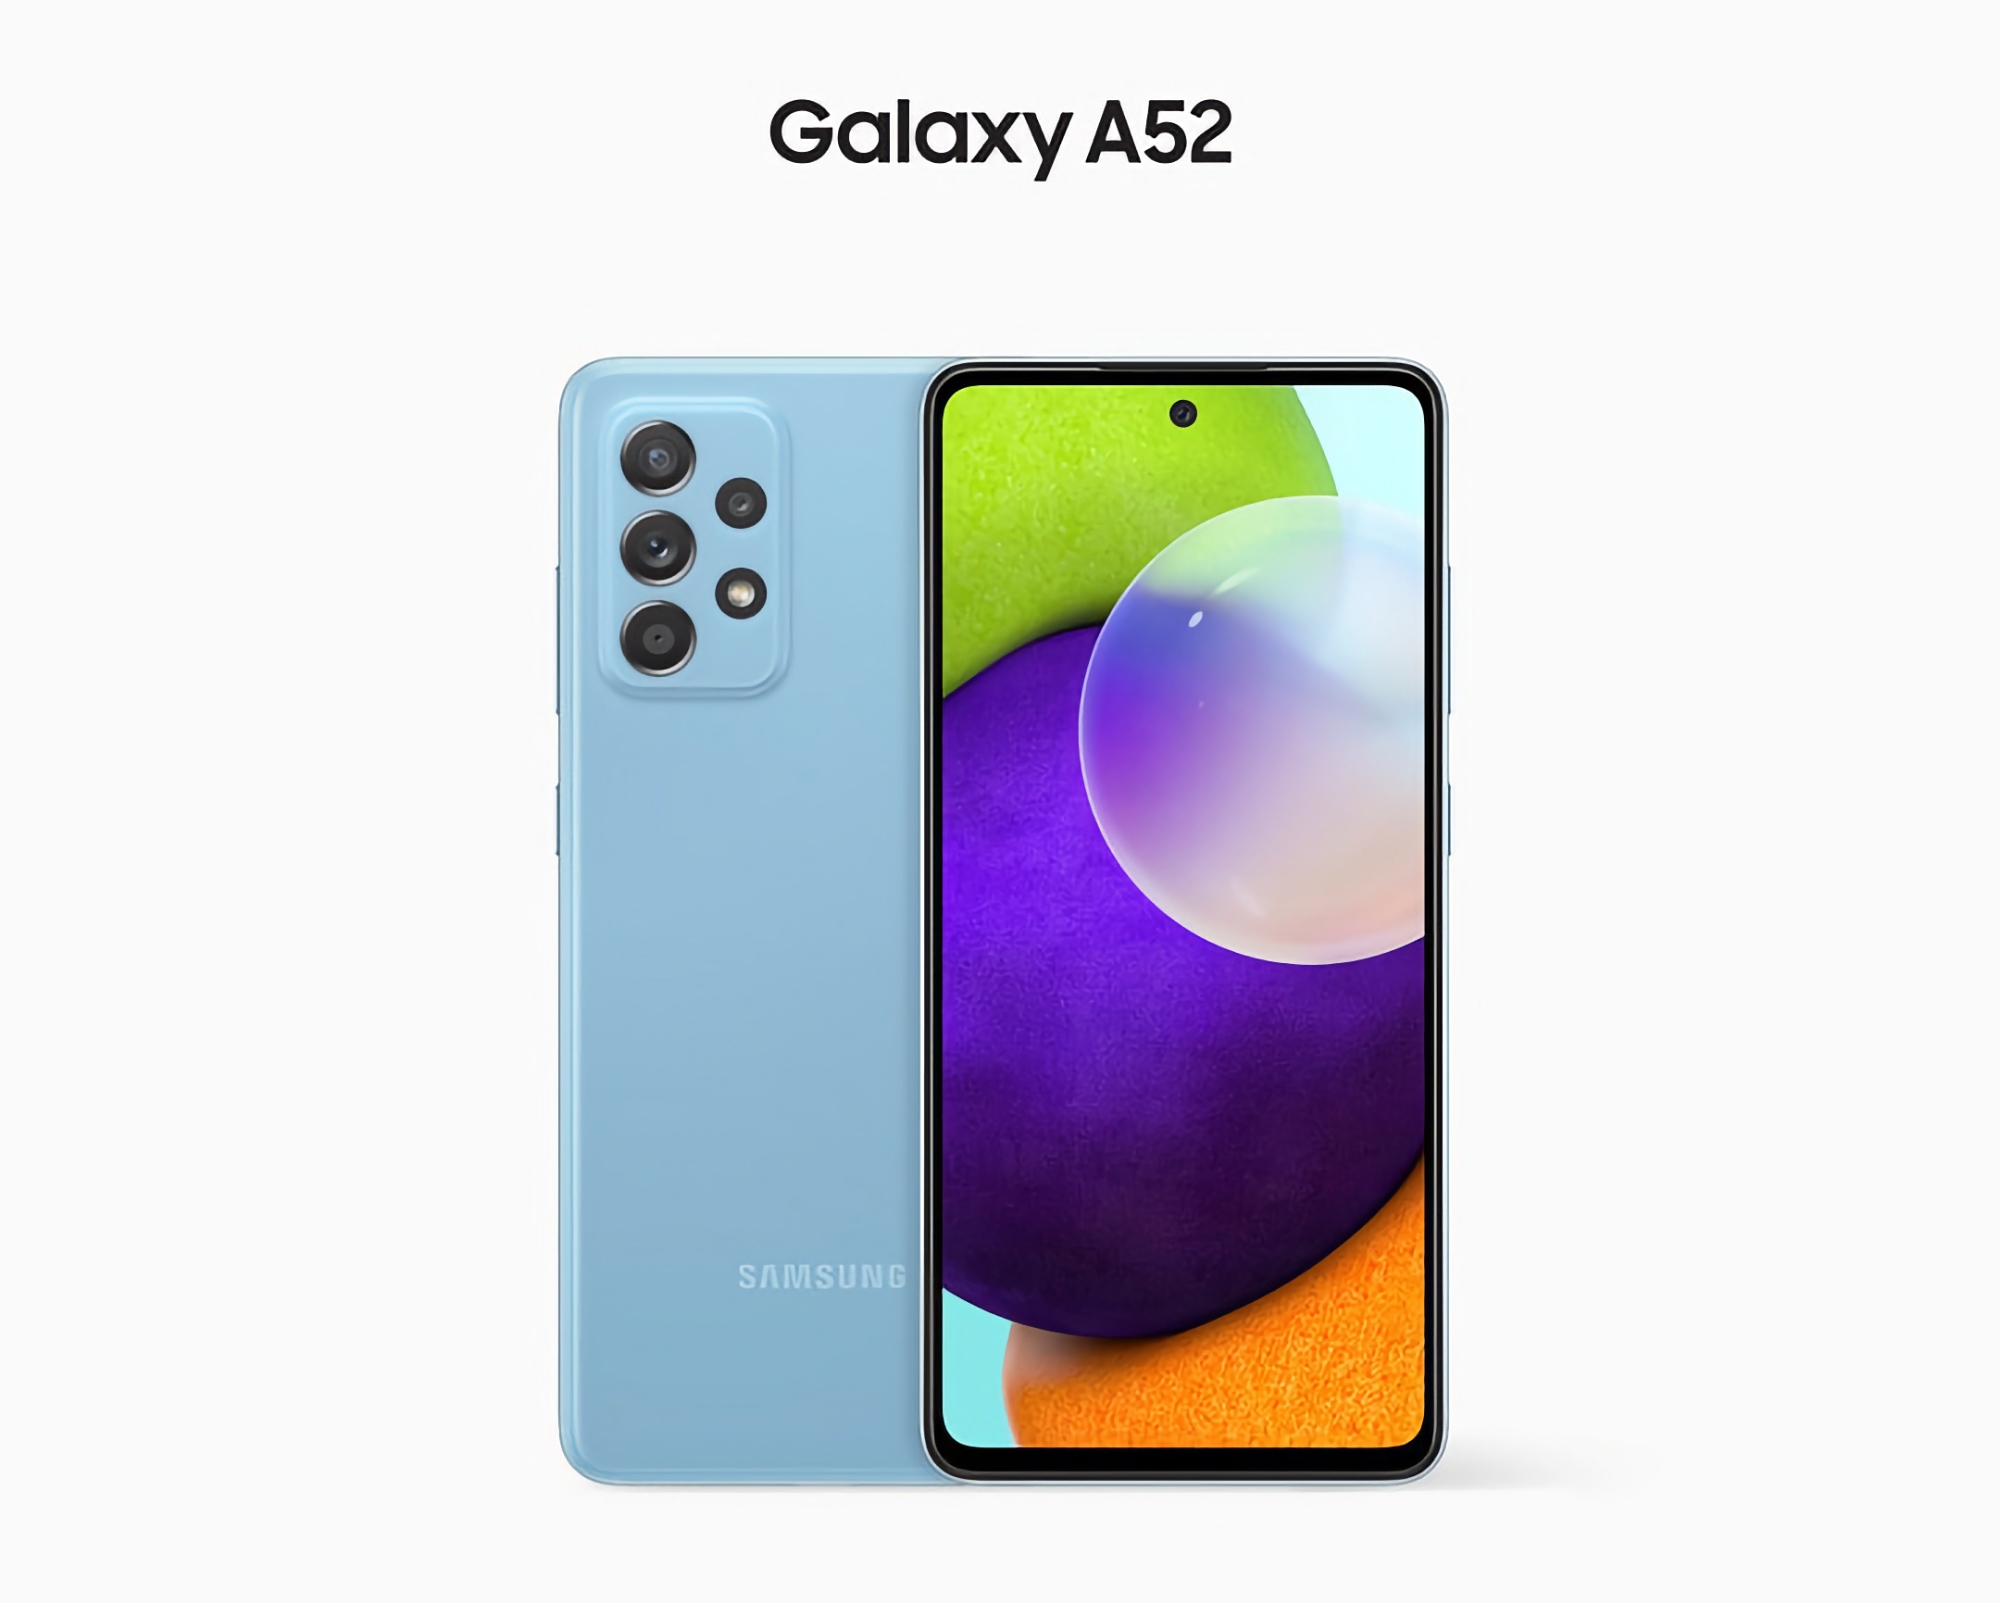 Enfin, le Samsung Galaxy A52 reçoit une version stable d'Android 13 avec One UI 5.0.